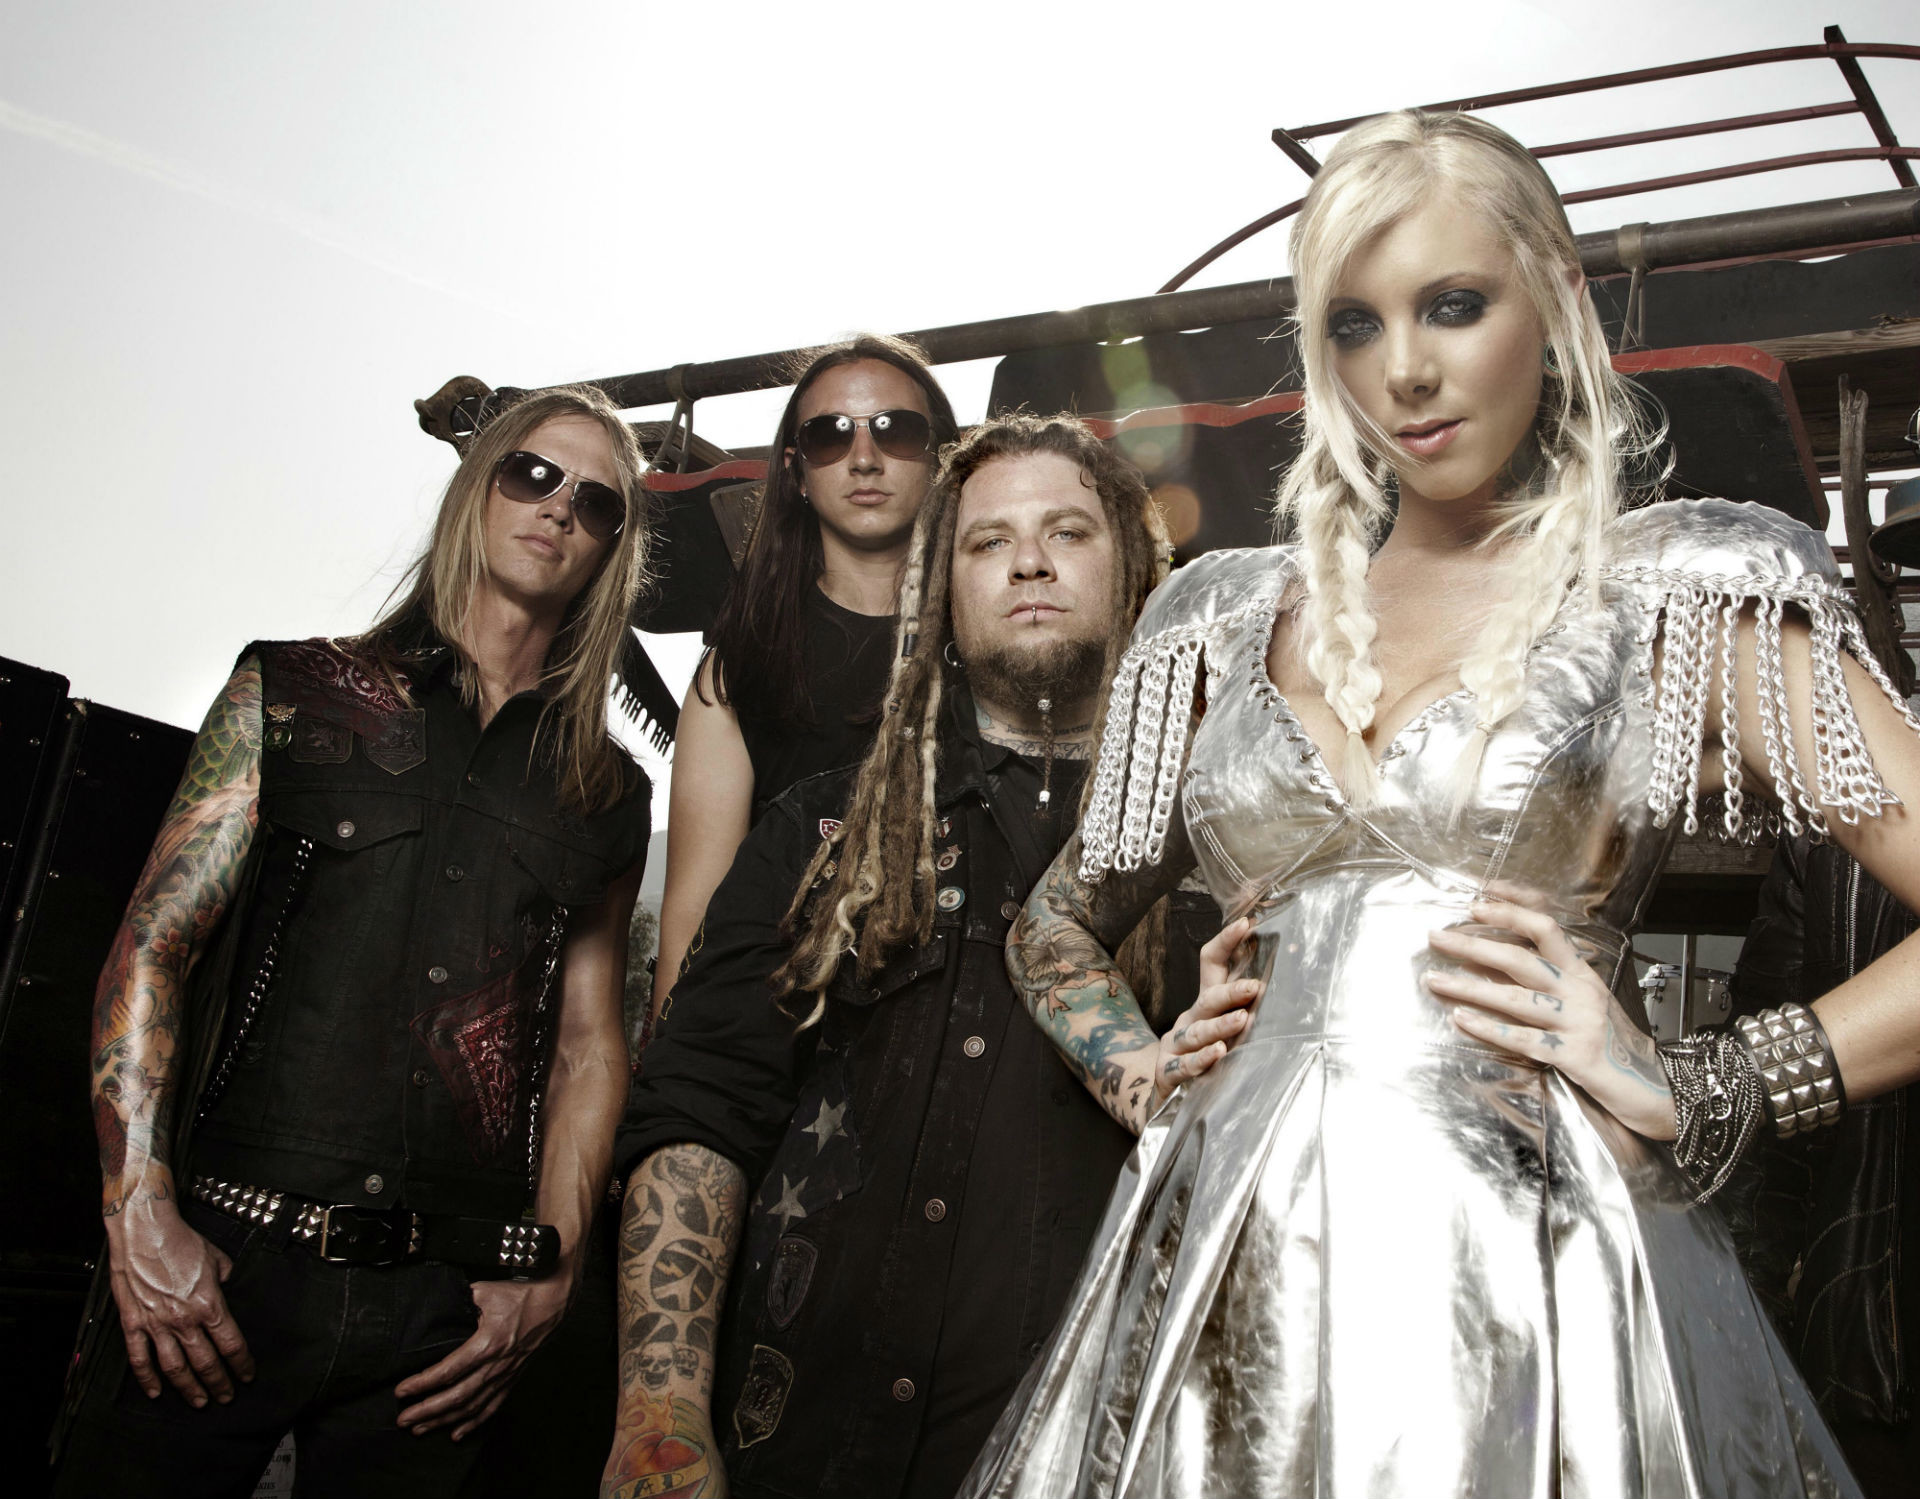 1920x1499 In This Moment Maria Brink women females girls sexy babes heavy metal hard  rock band group blondes gothic wallpaper |  | 52683 | WallpaperUP